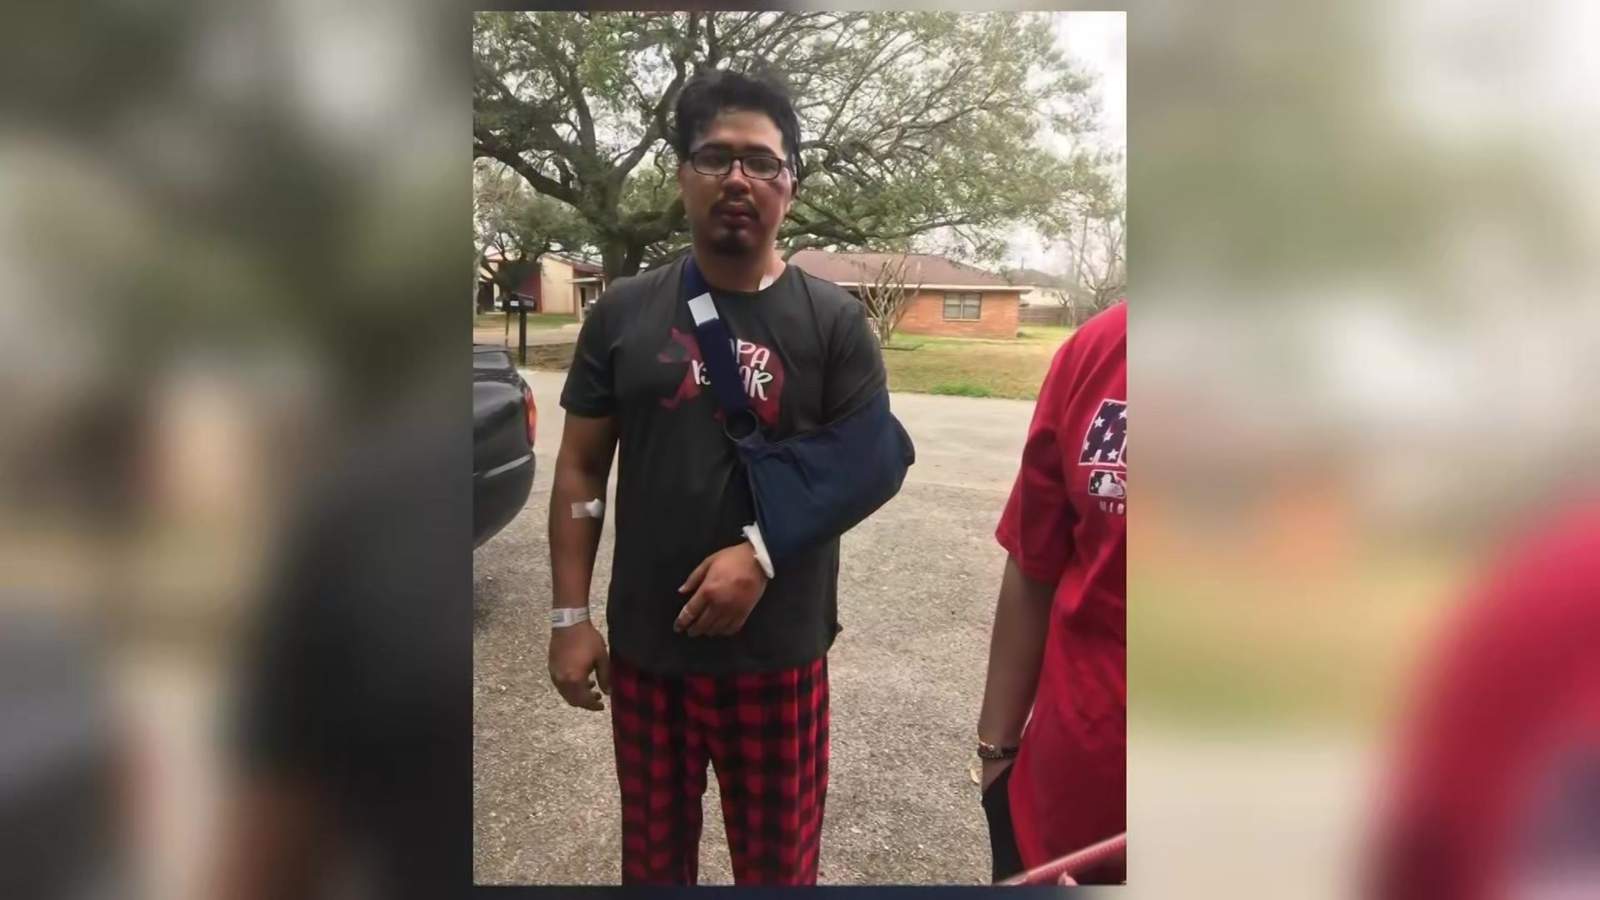 Baytown man recovering after hit-and-run in Baytown; Driver sought